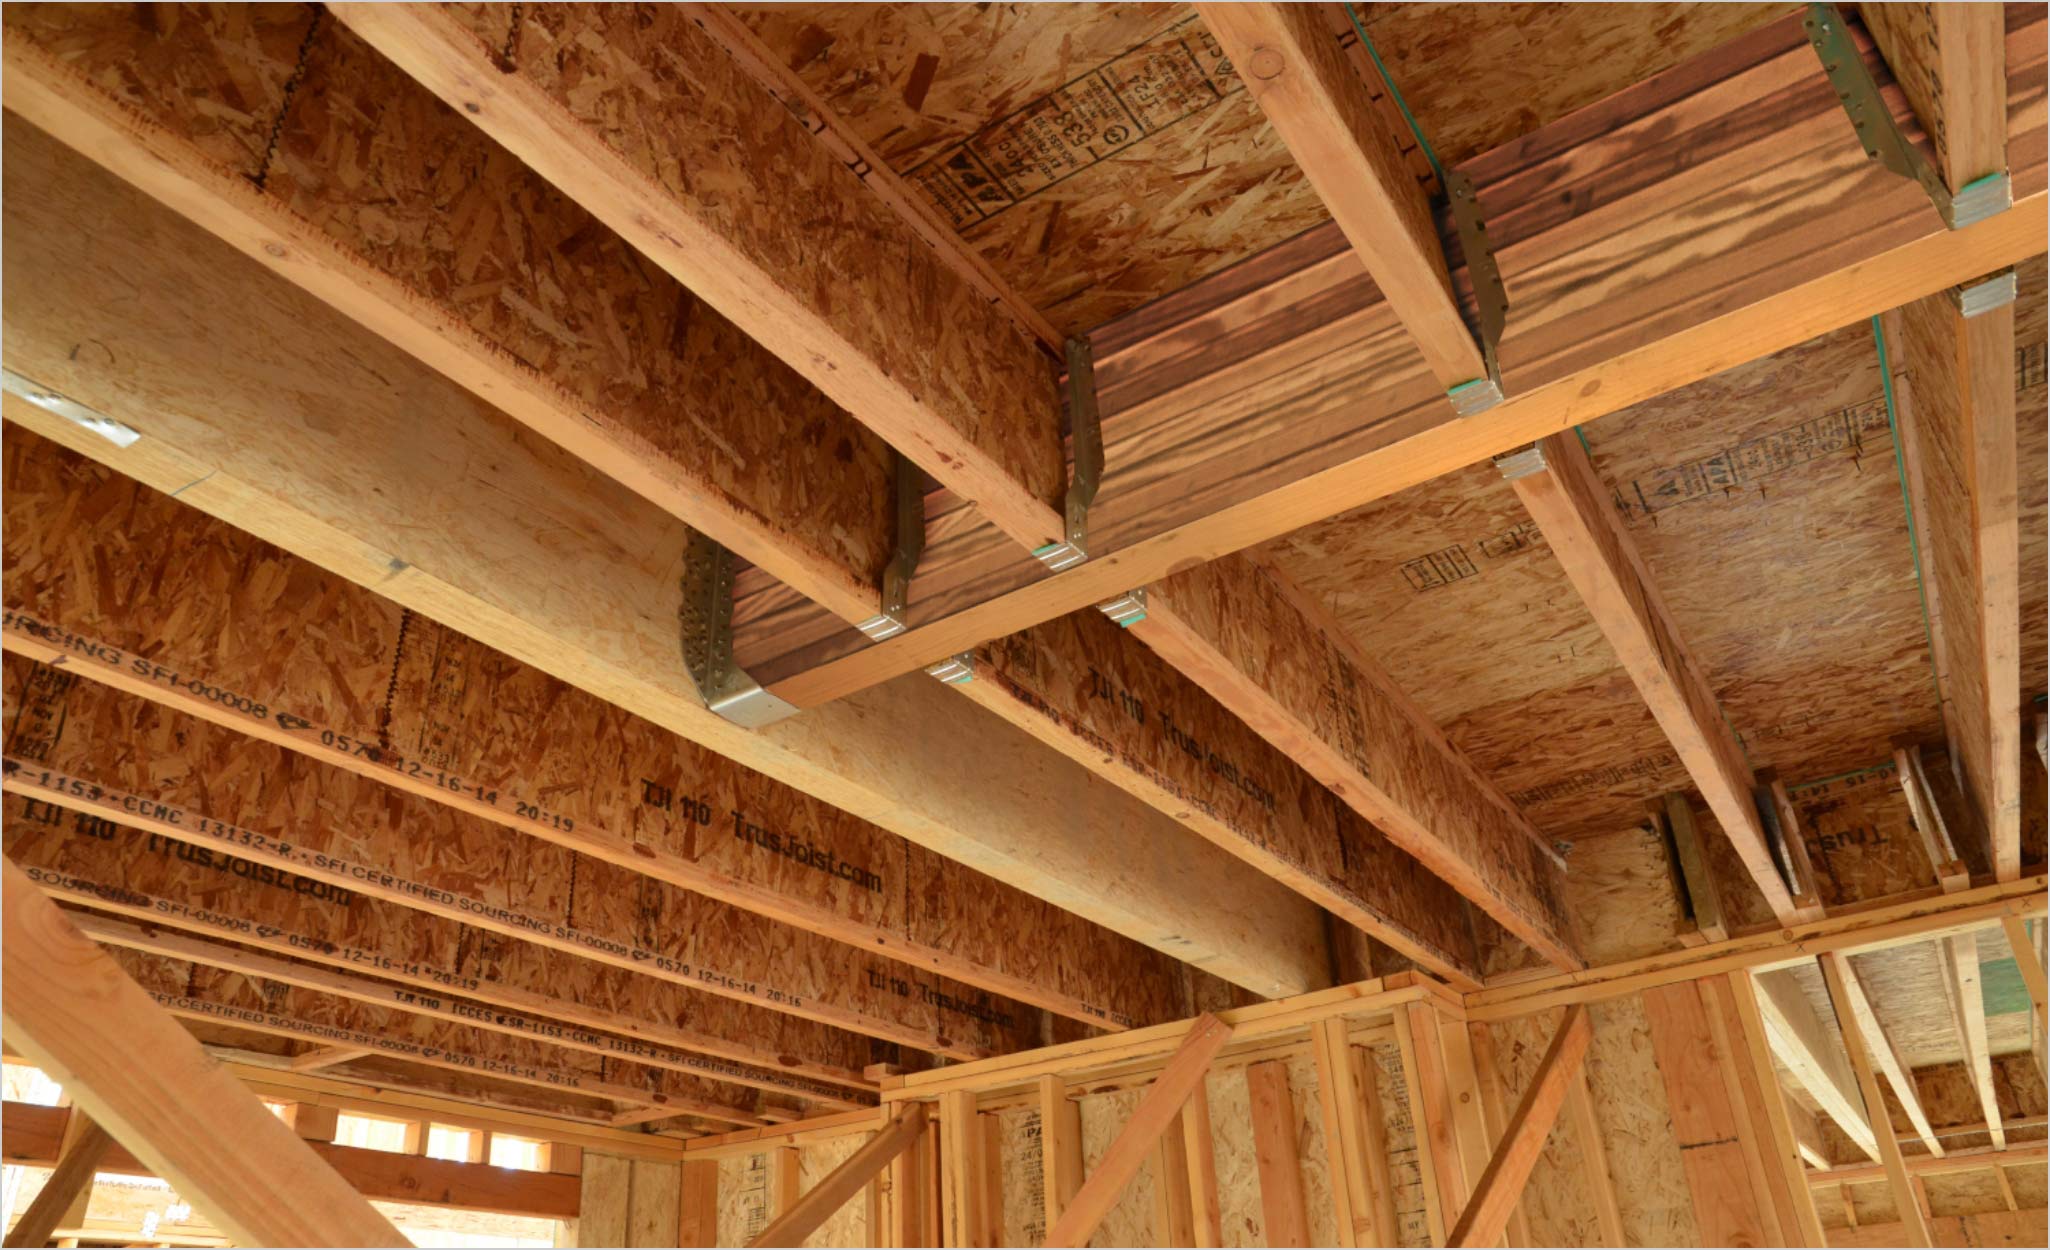 The ceiling joists of a residence.